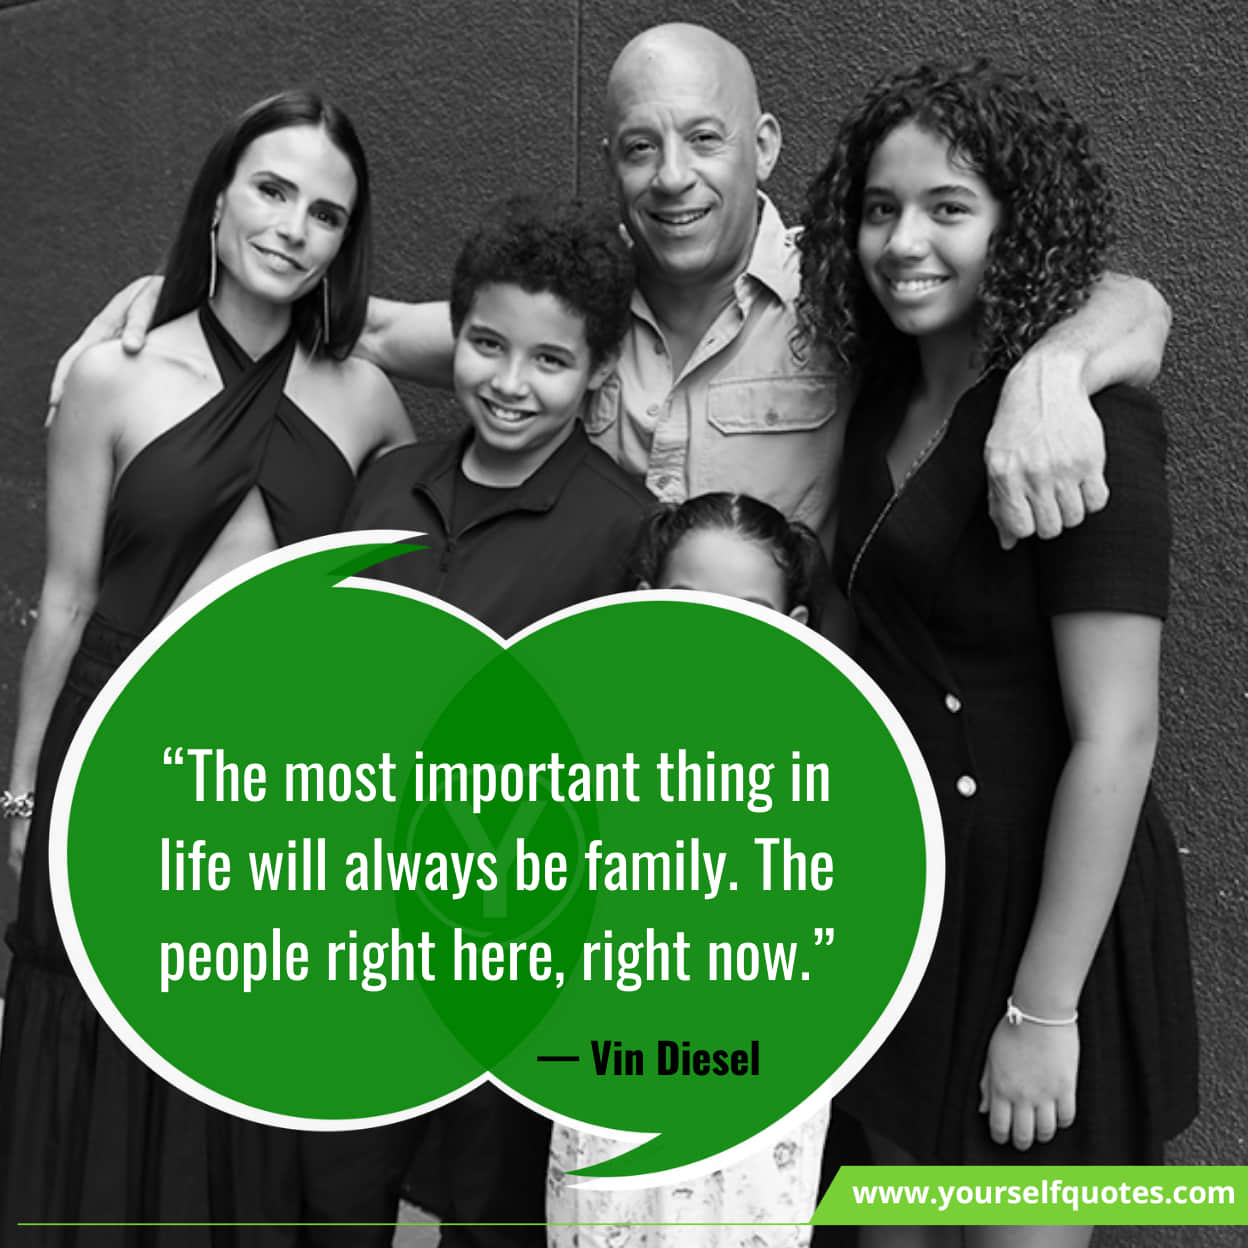 Vin Diesel Quotes About Family & Life